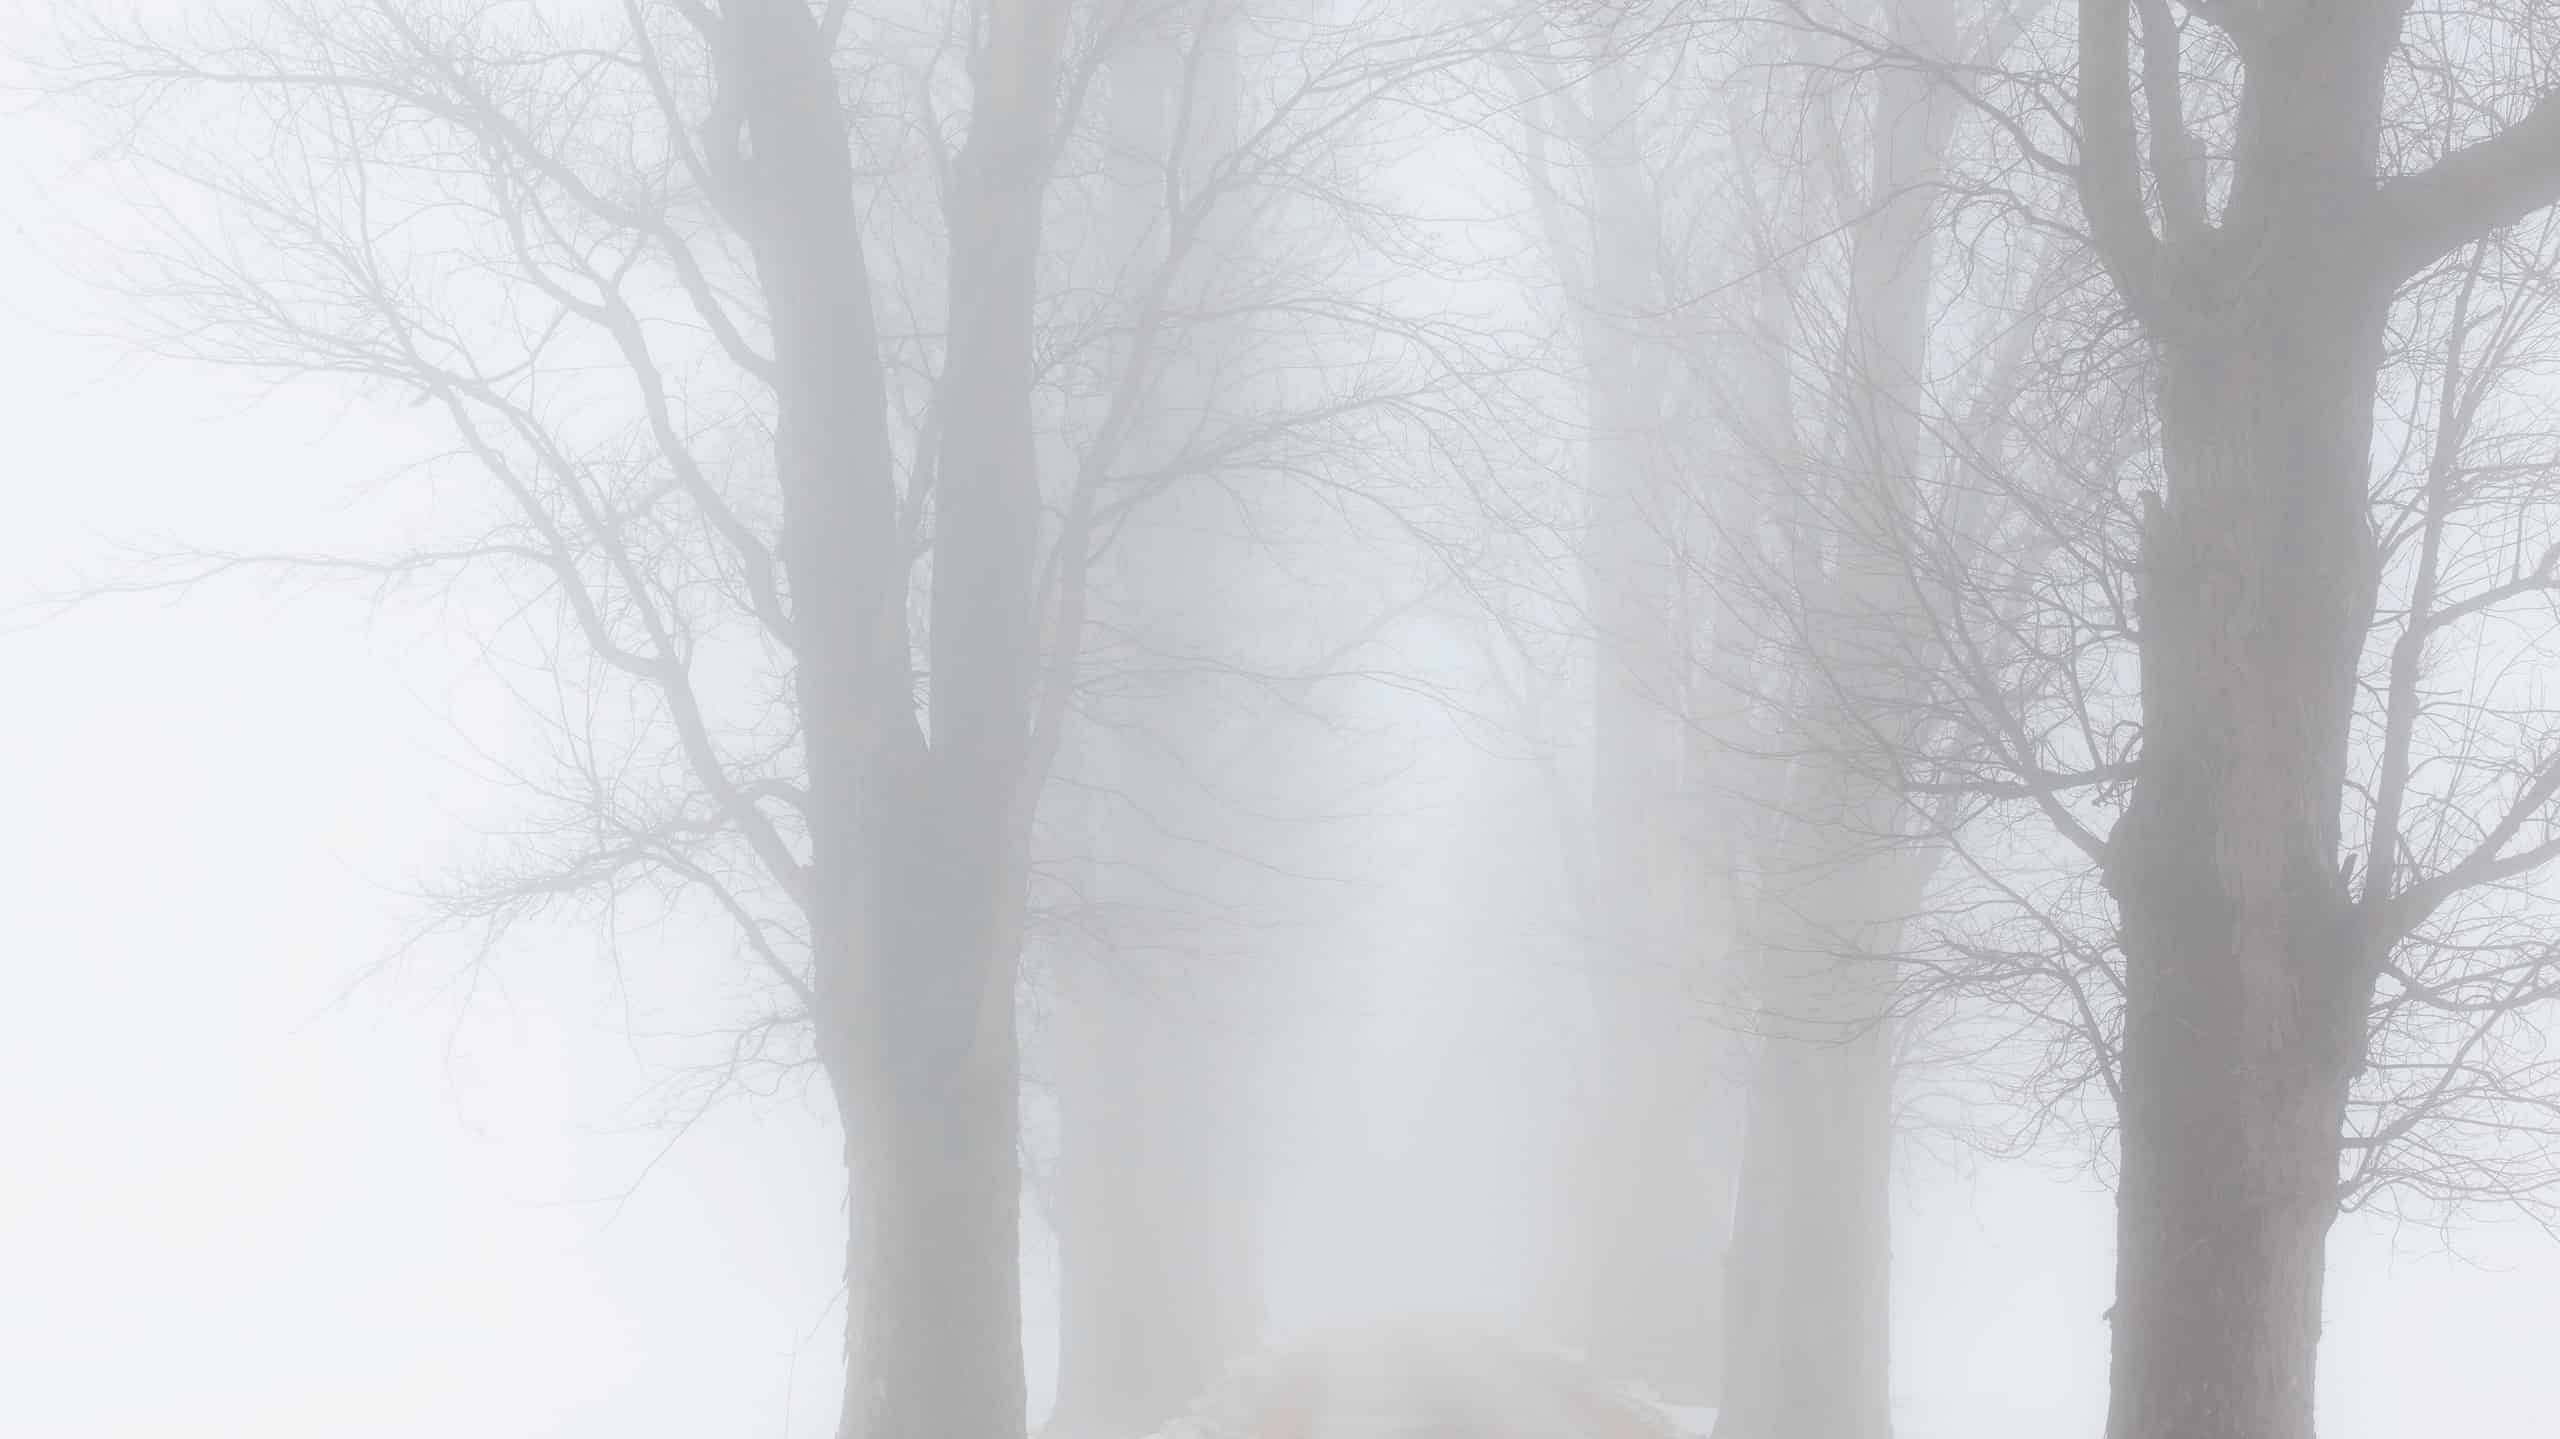 Perspective of narrow road lined with tall, bare, deciduous trees that disappear in fog after a snowstorm in northern Illinois, USA